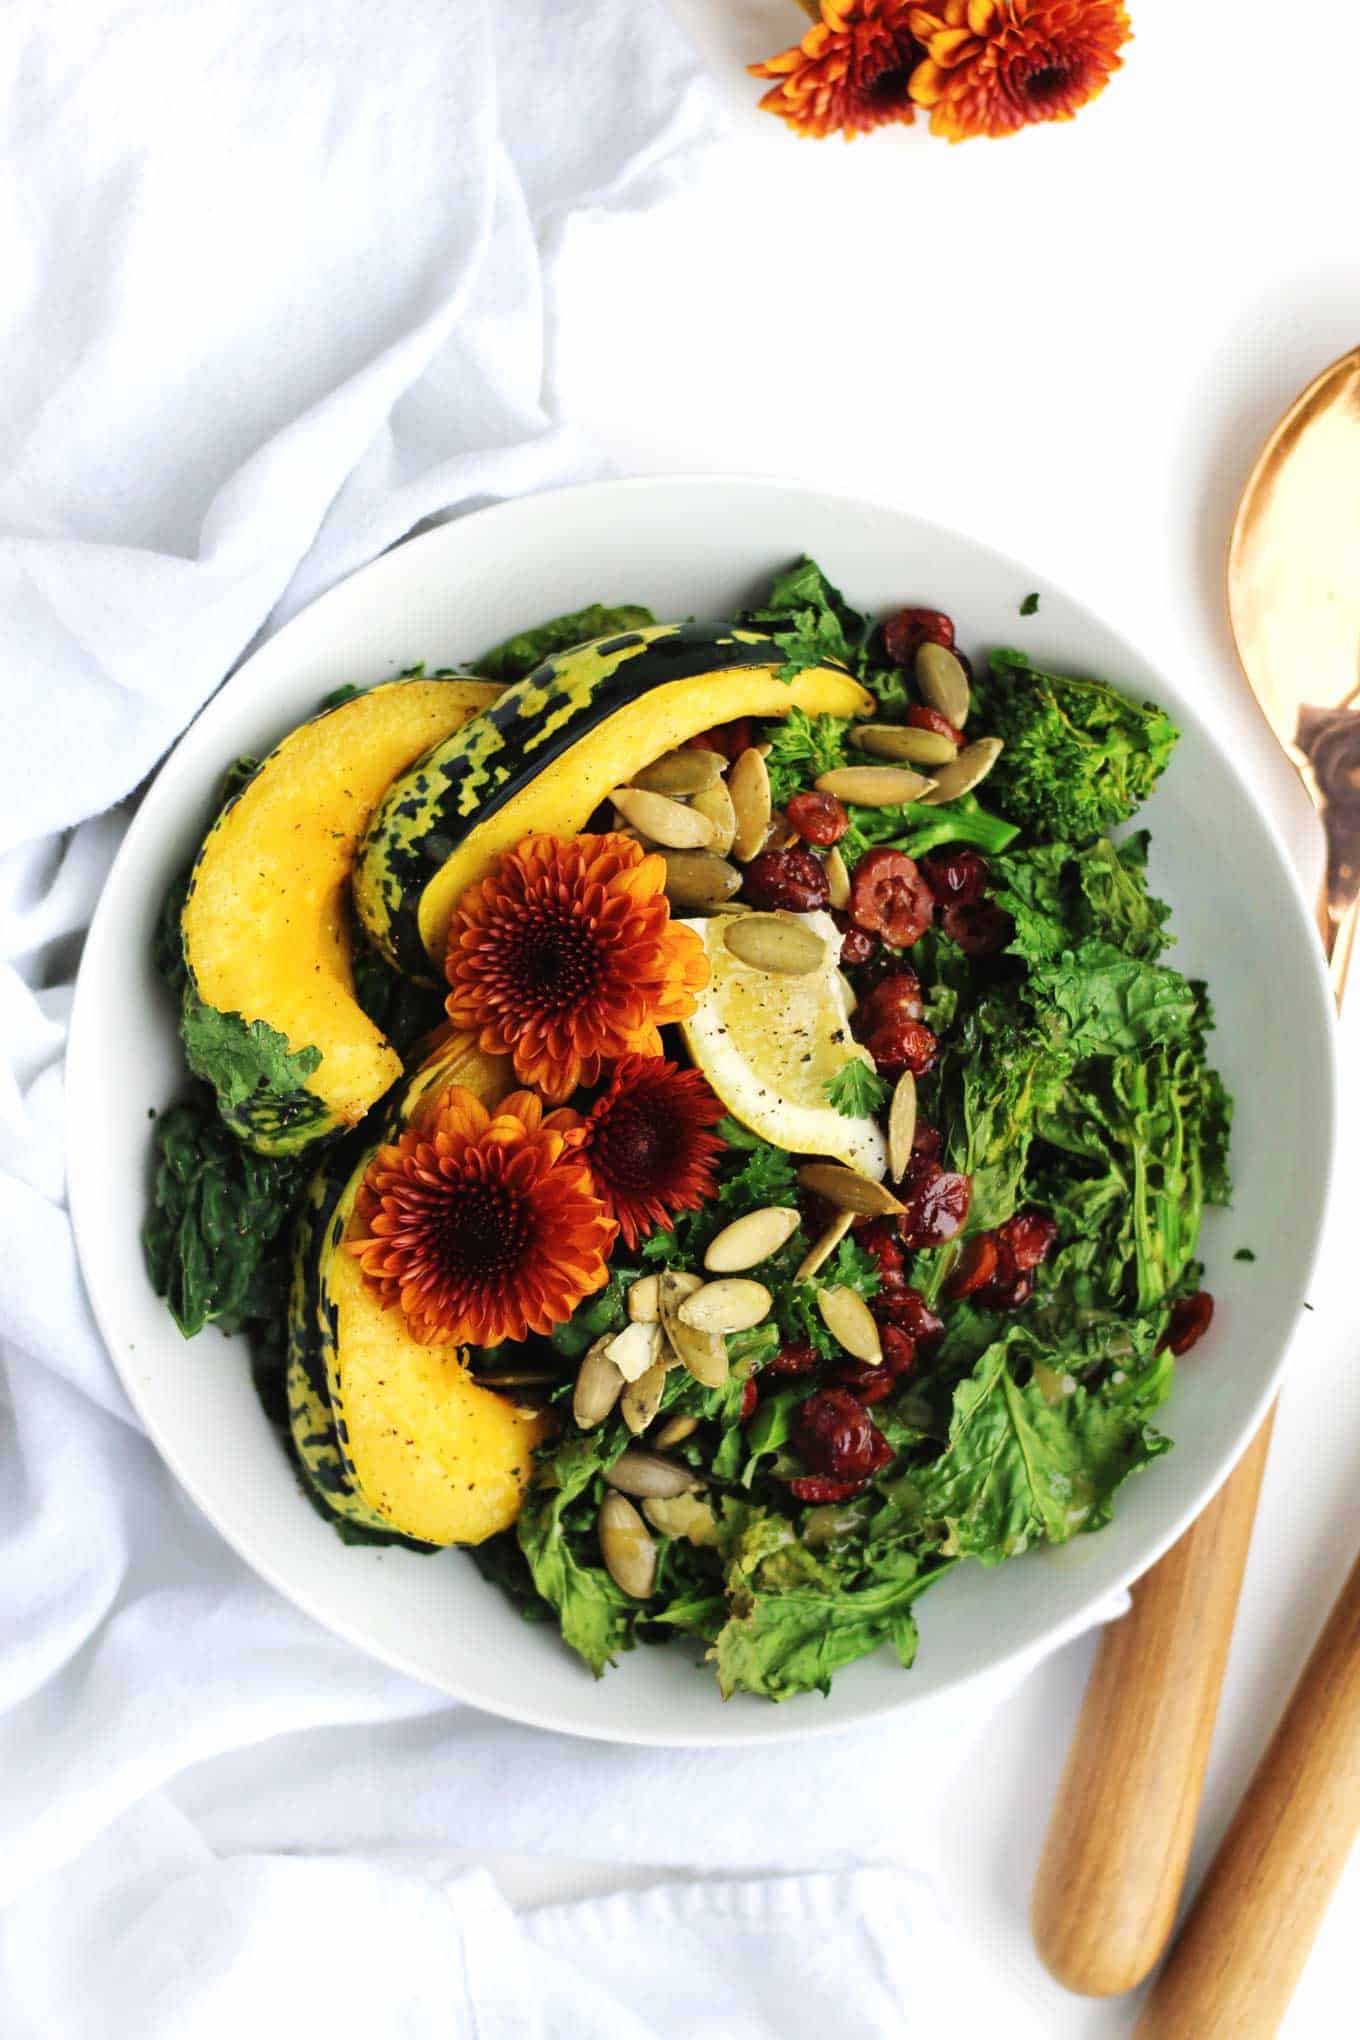 30-minute roasted squash salad with broccoli rabe and kale recipe! A warm, vegan salad perfect for a healthy weeknight dinner or meatless monday. // Rhubarbarians // vegetarian salad / dairy free dinner / gluten free meal / #roastedsquash #meatlessmonday #vegandinner #healthysalad #rhubarbarians #glutenfree